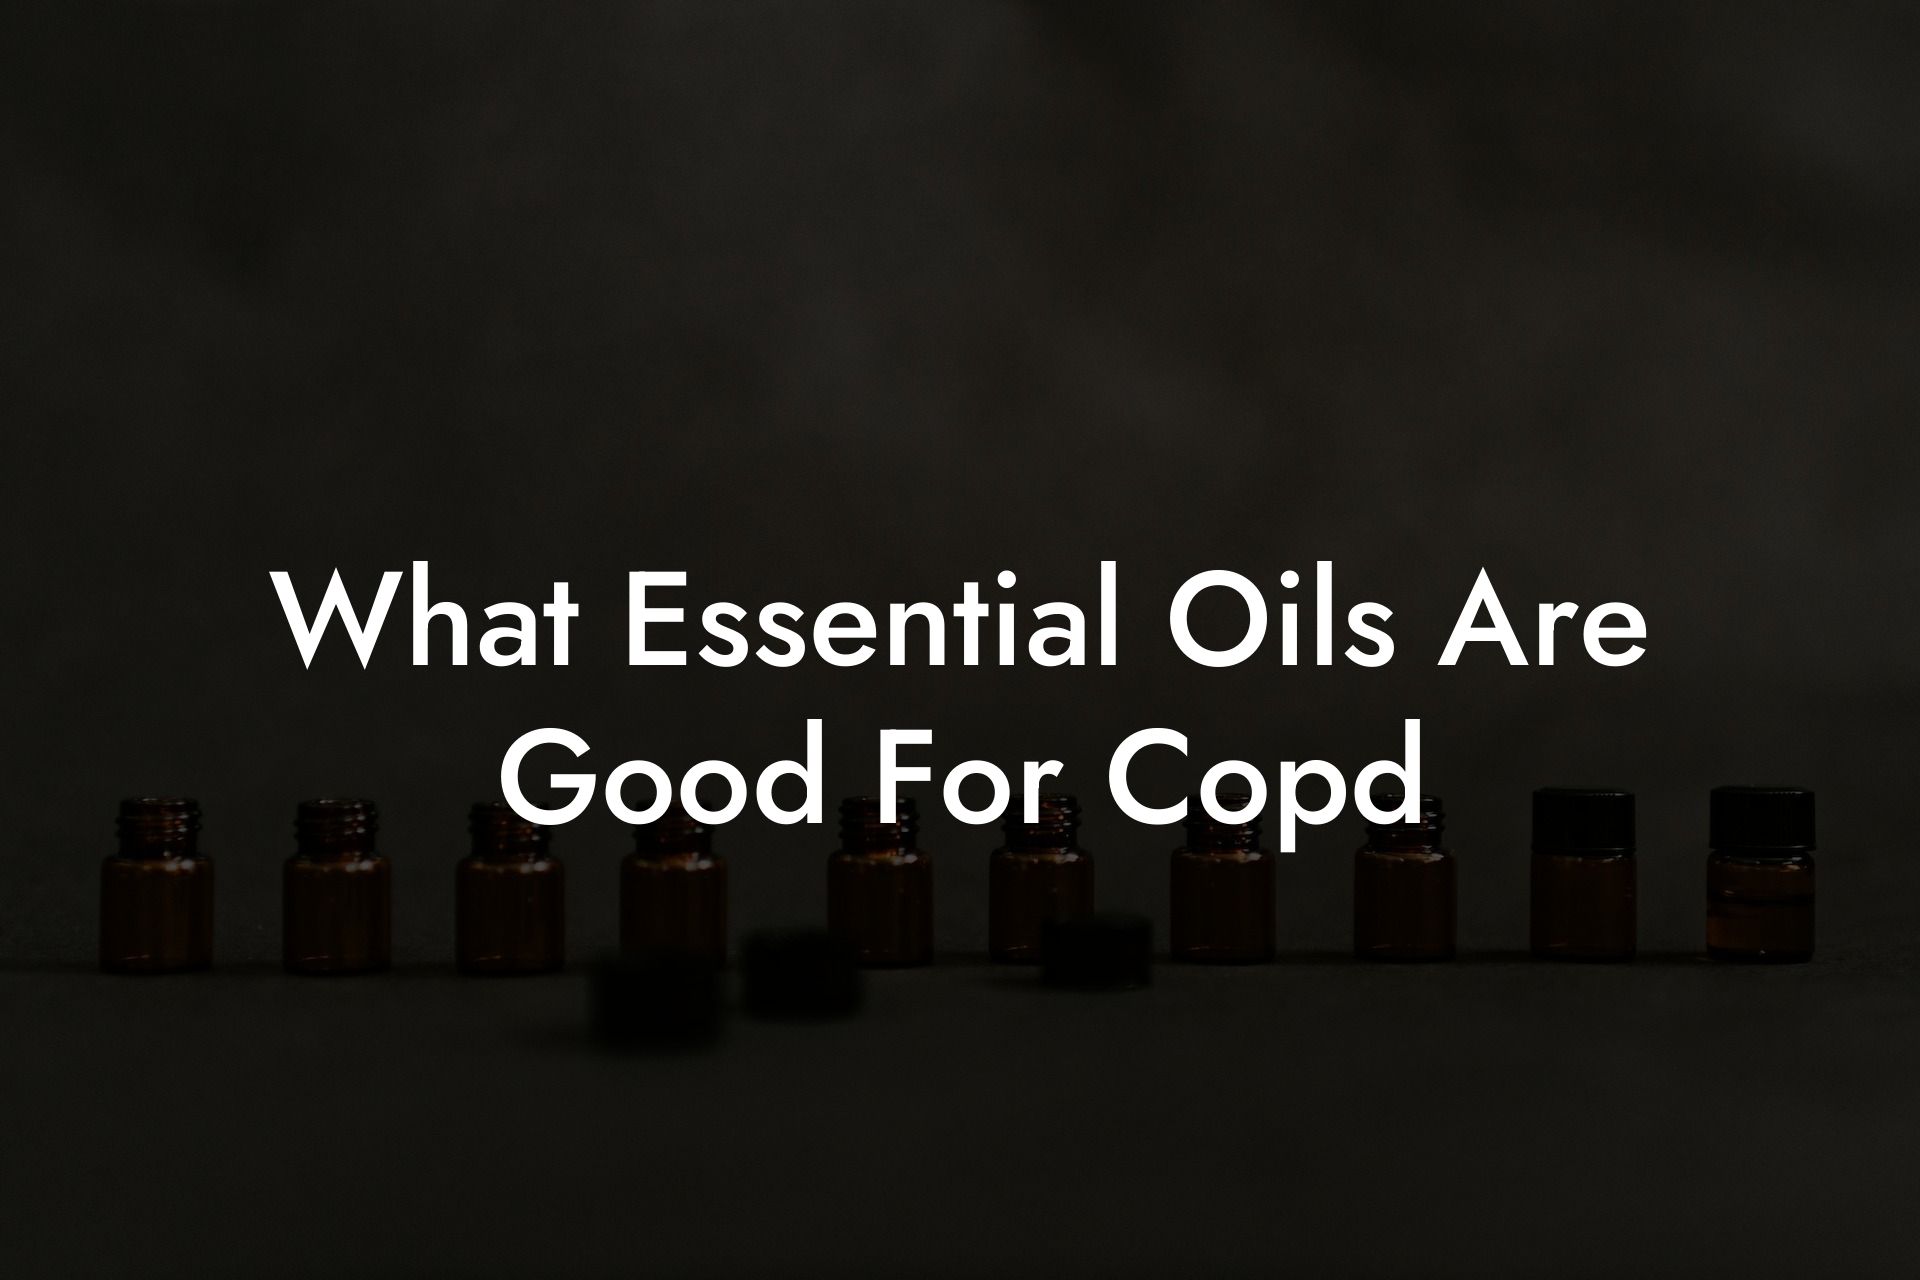 What Essential Oils Are Good For Copd